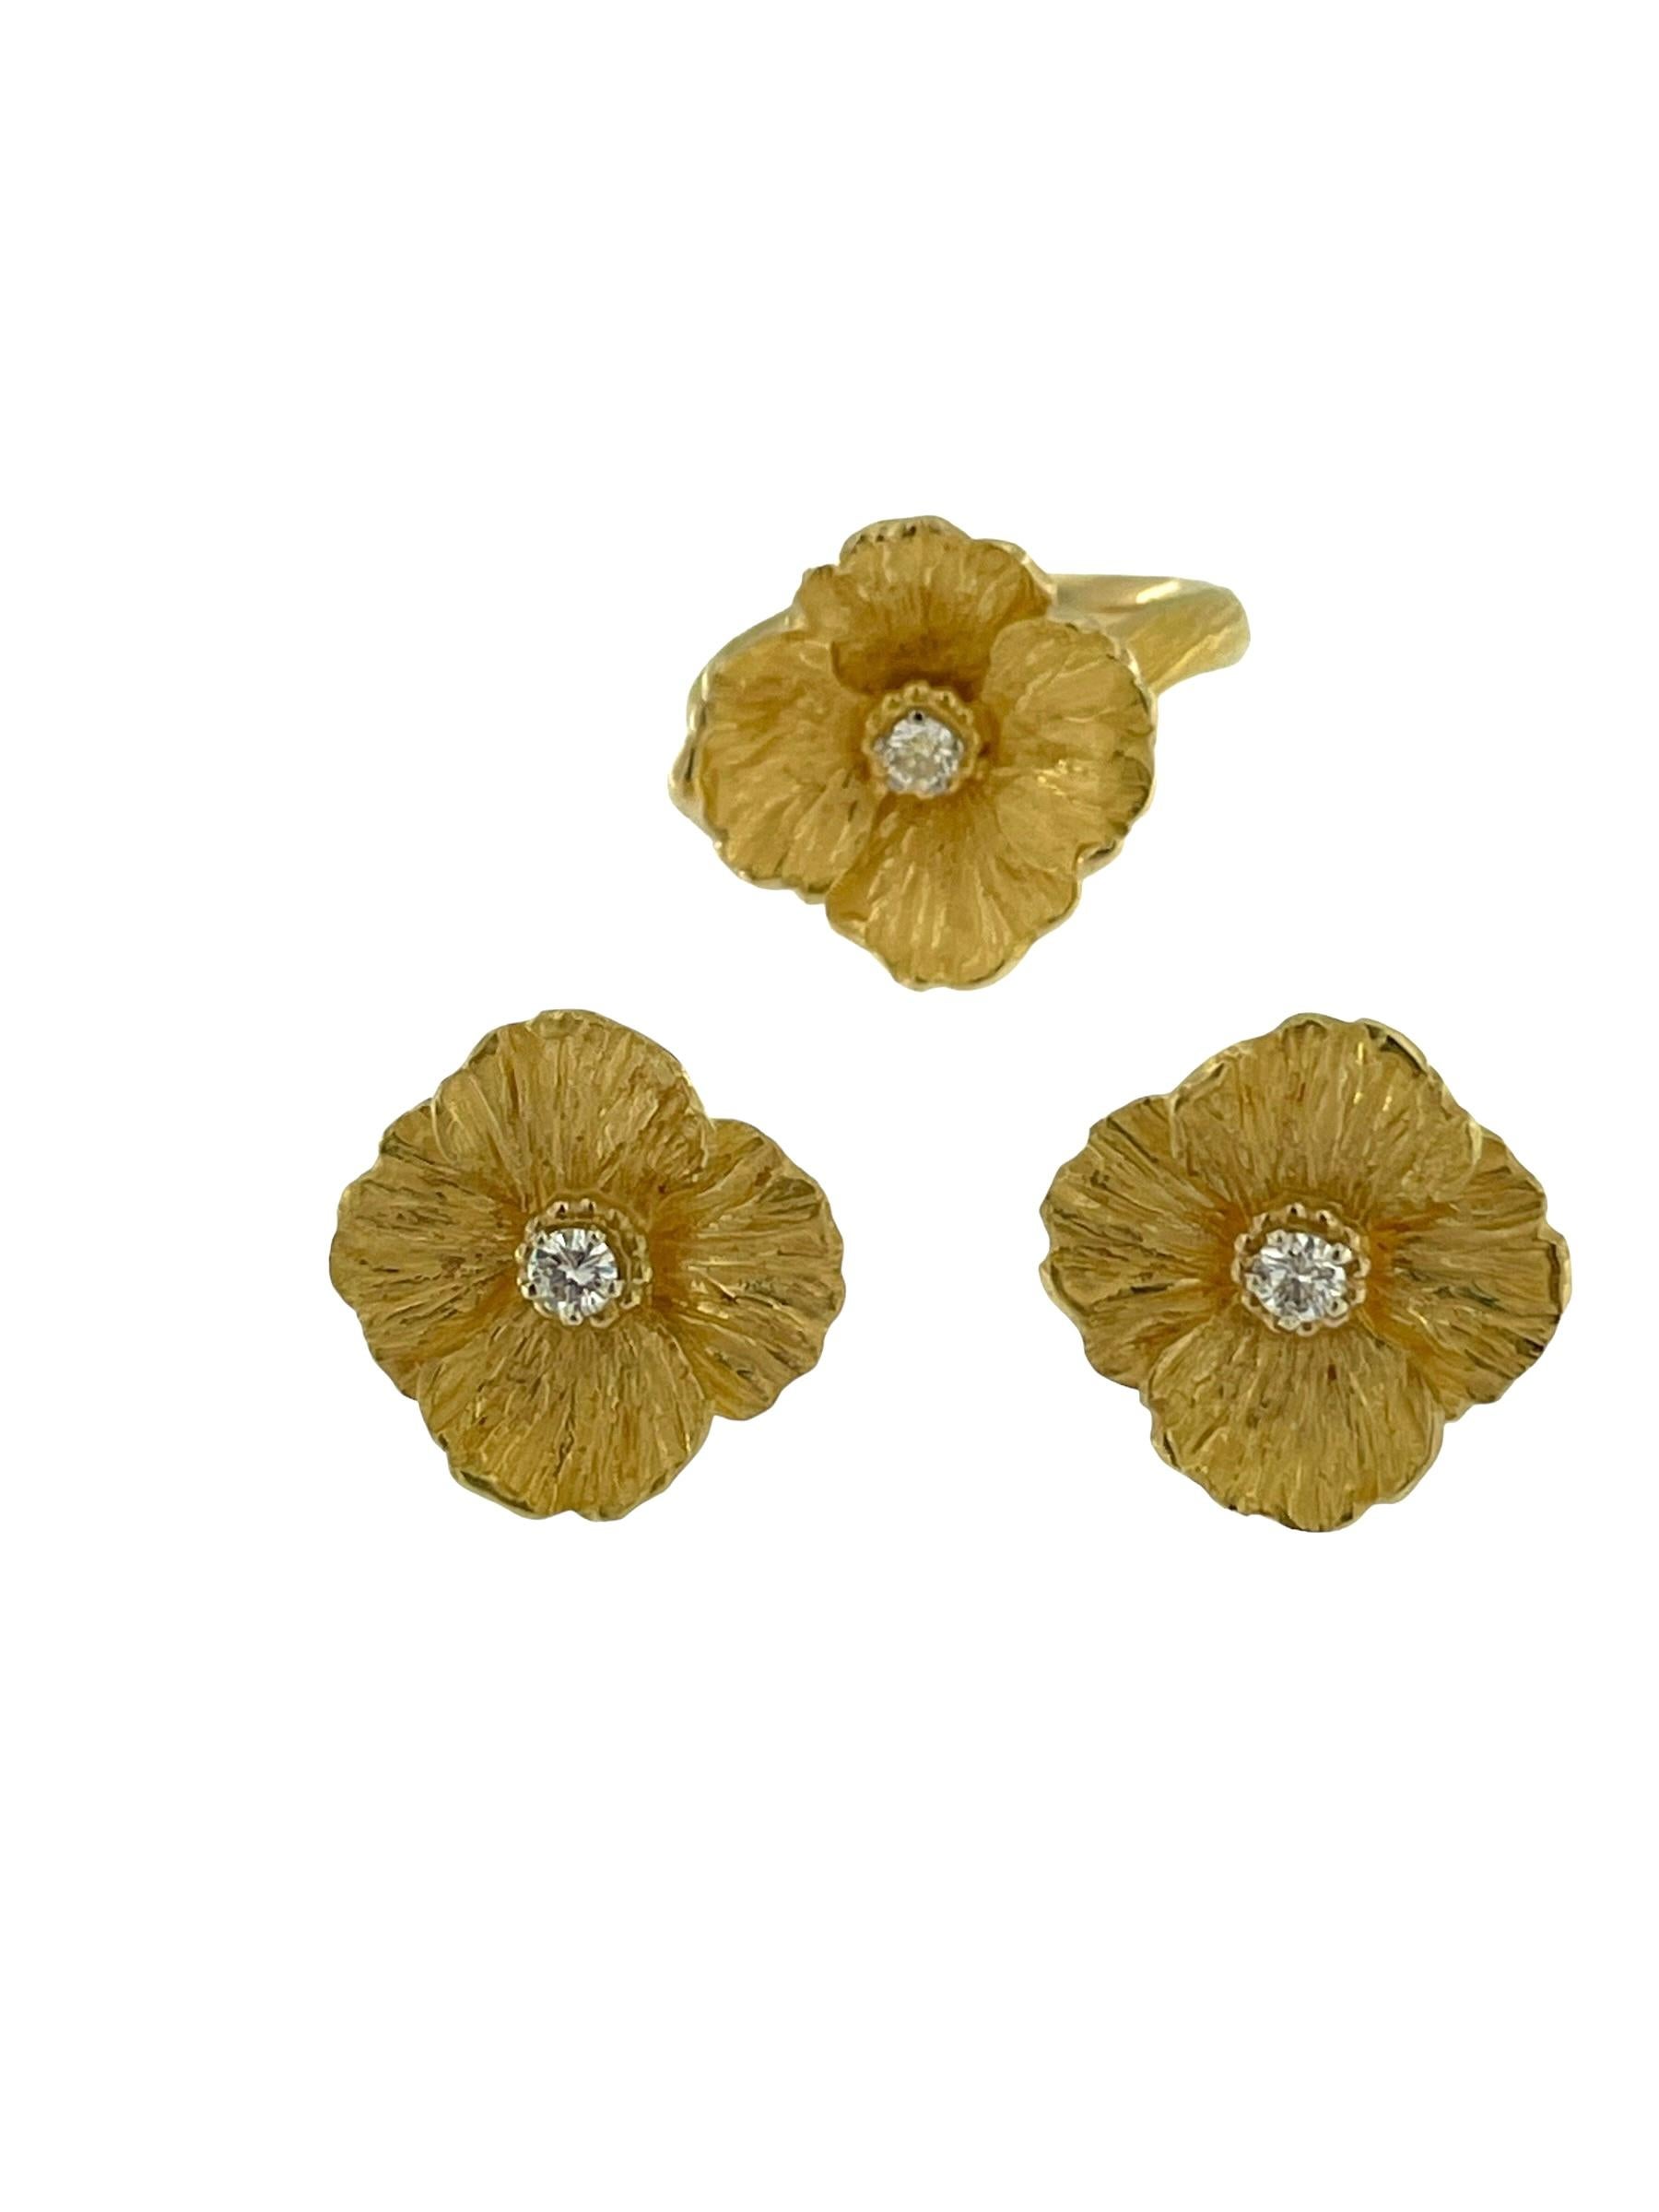 HRD Certified Yellow Gold Flower Set Ring and Earrings with Diamonds For Sale 1